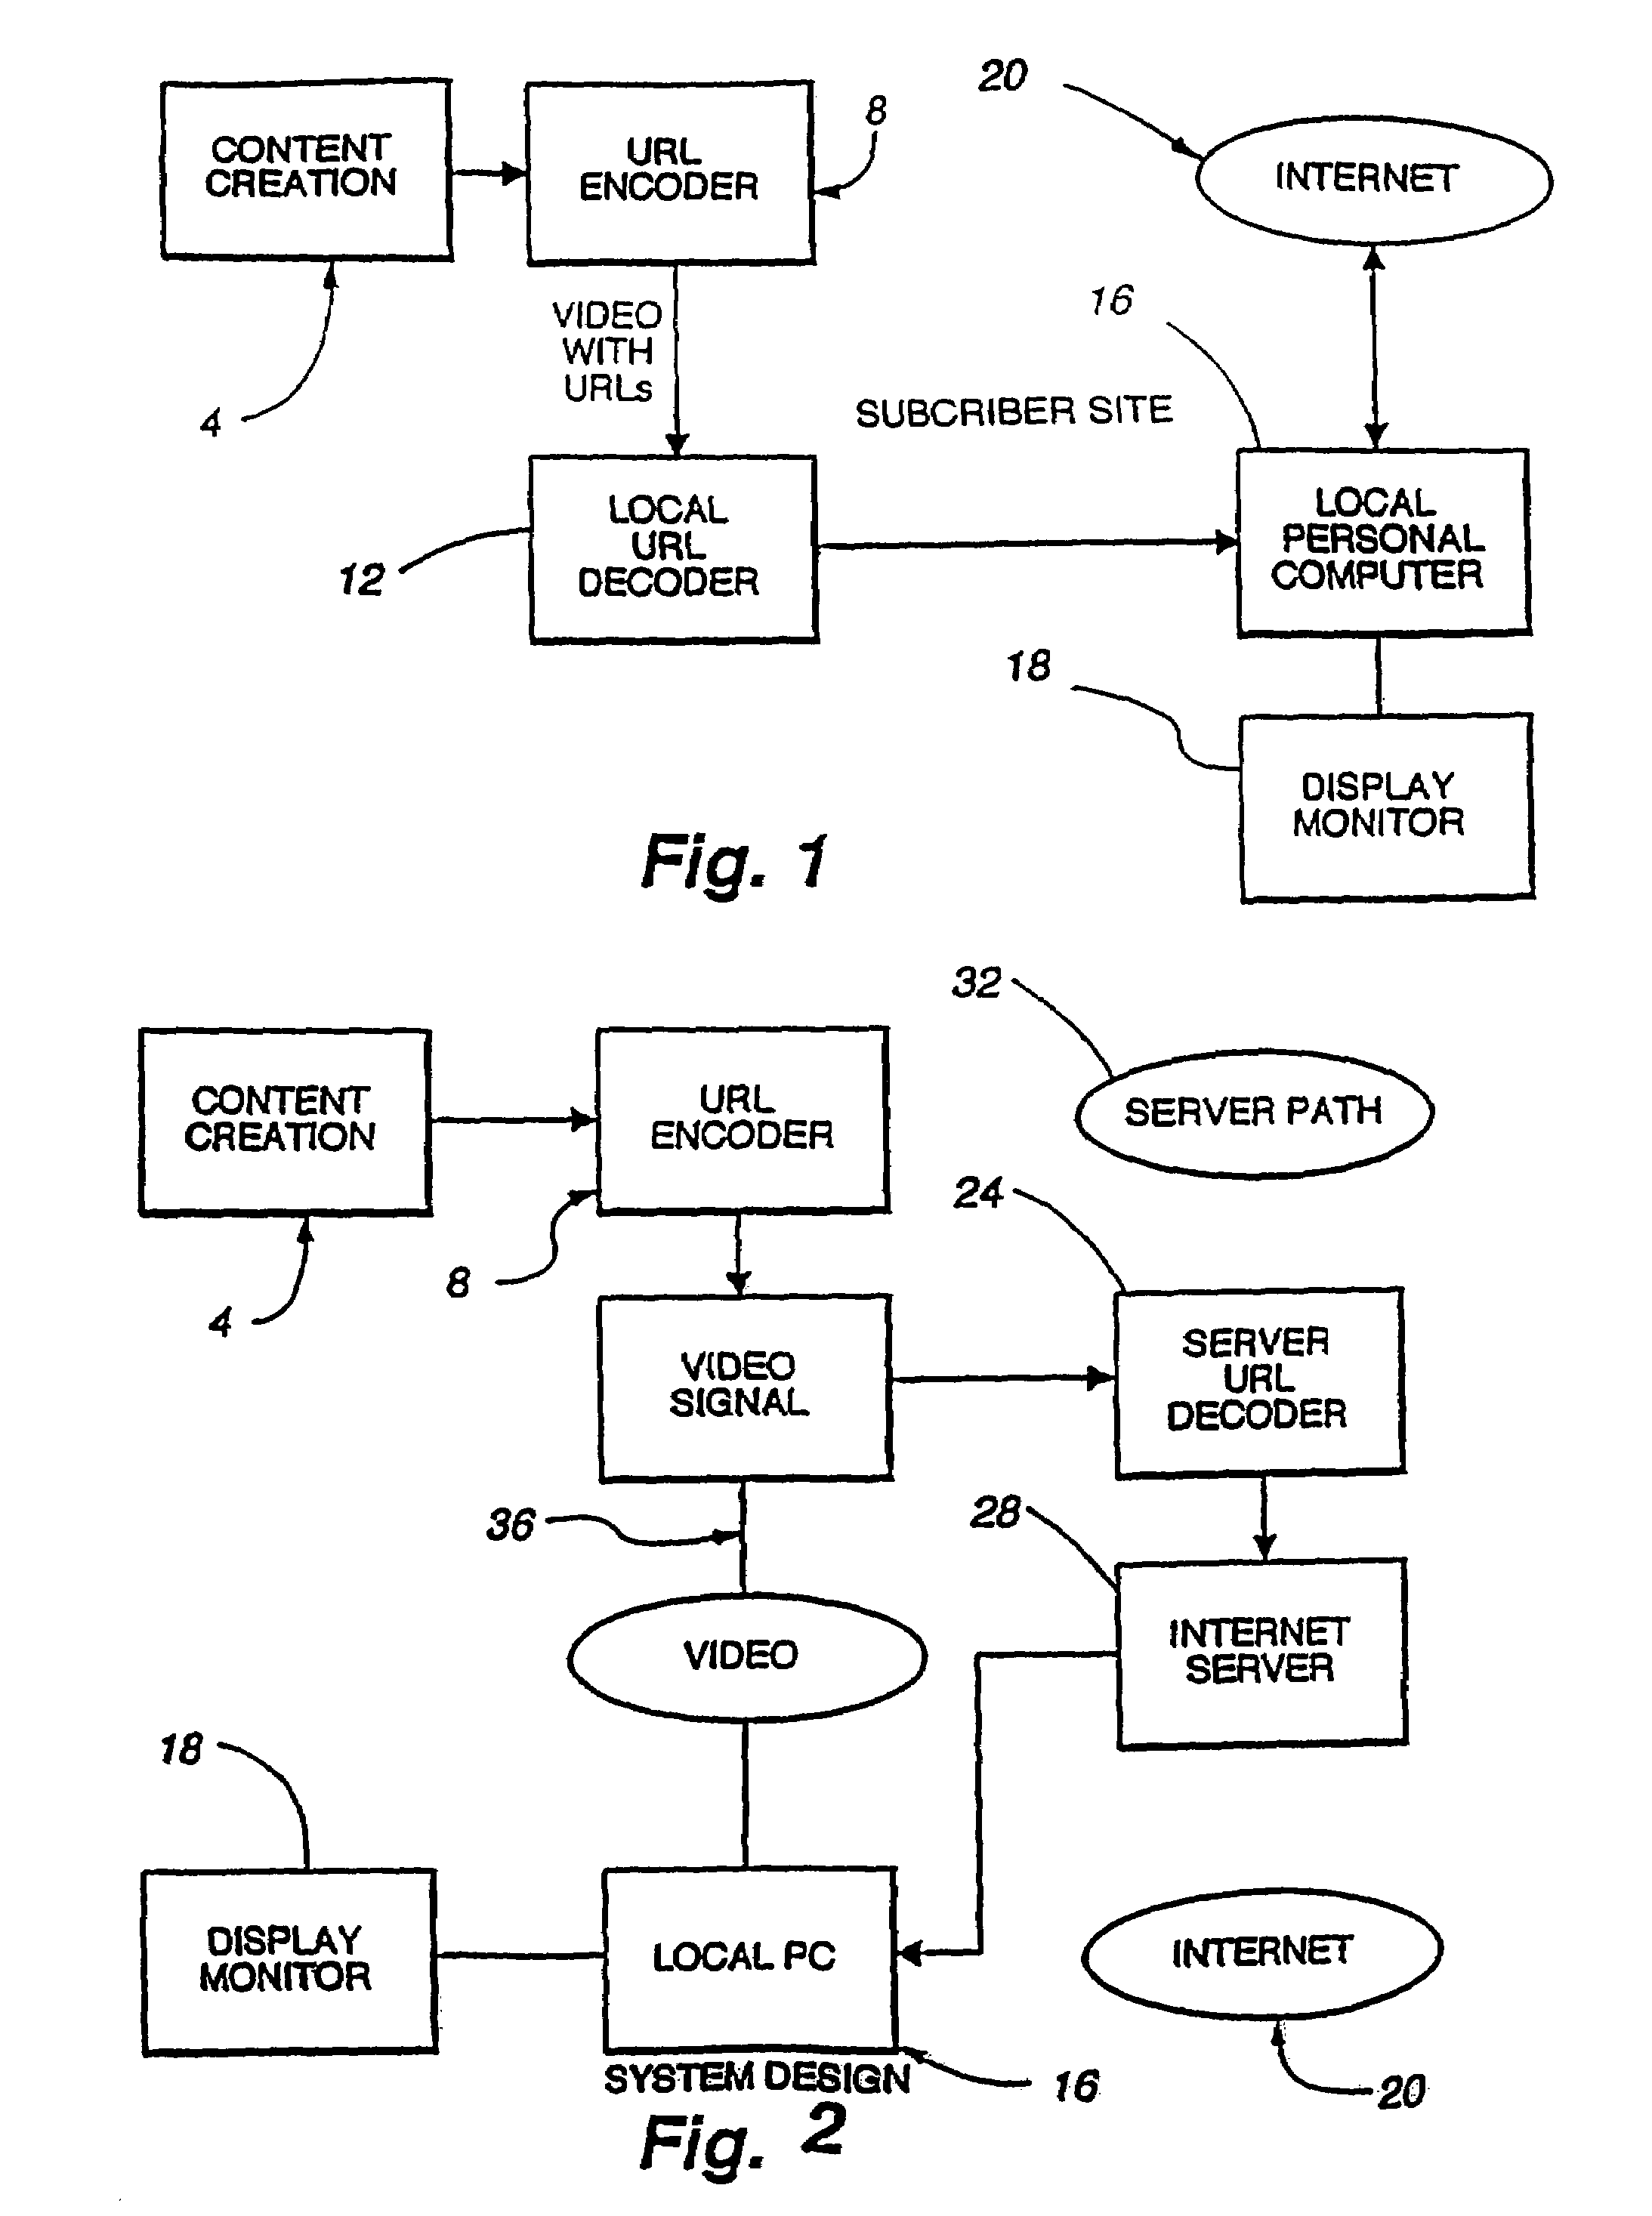 Enhanced video programming system and method for incorporating and displaying retrieved integrated Internet information segments